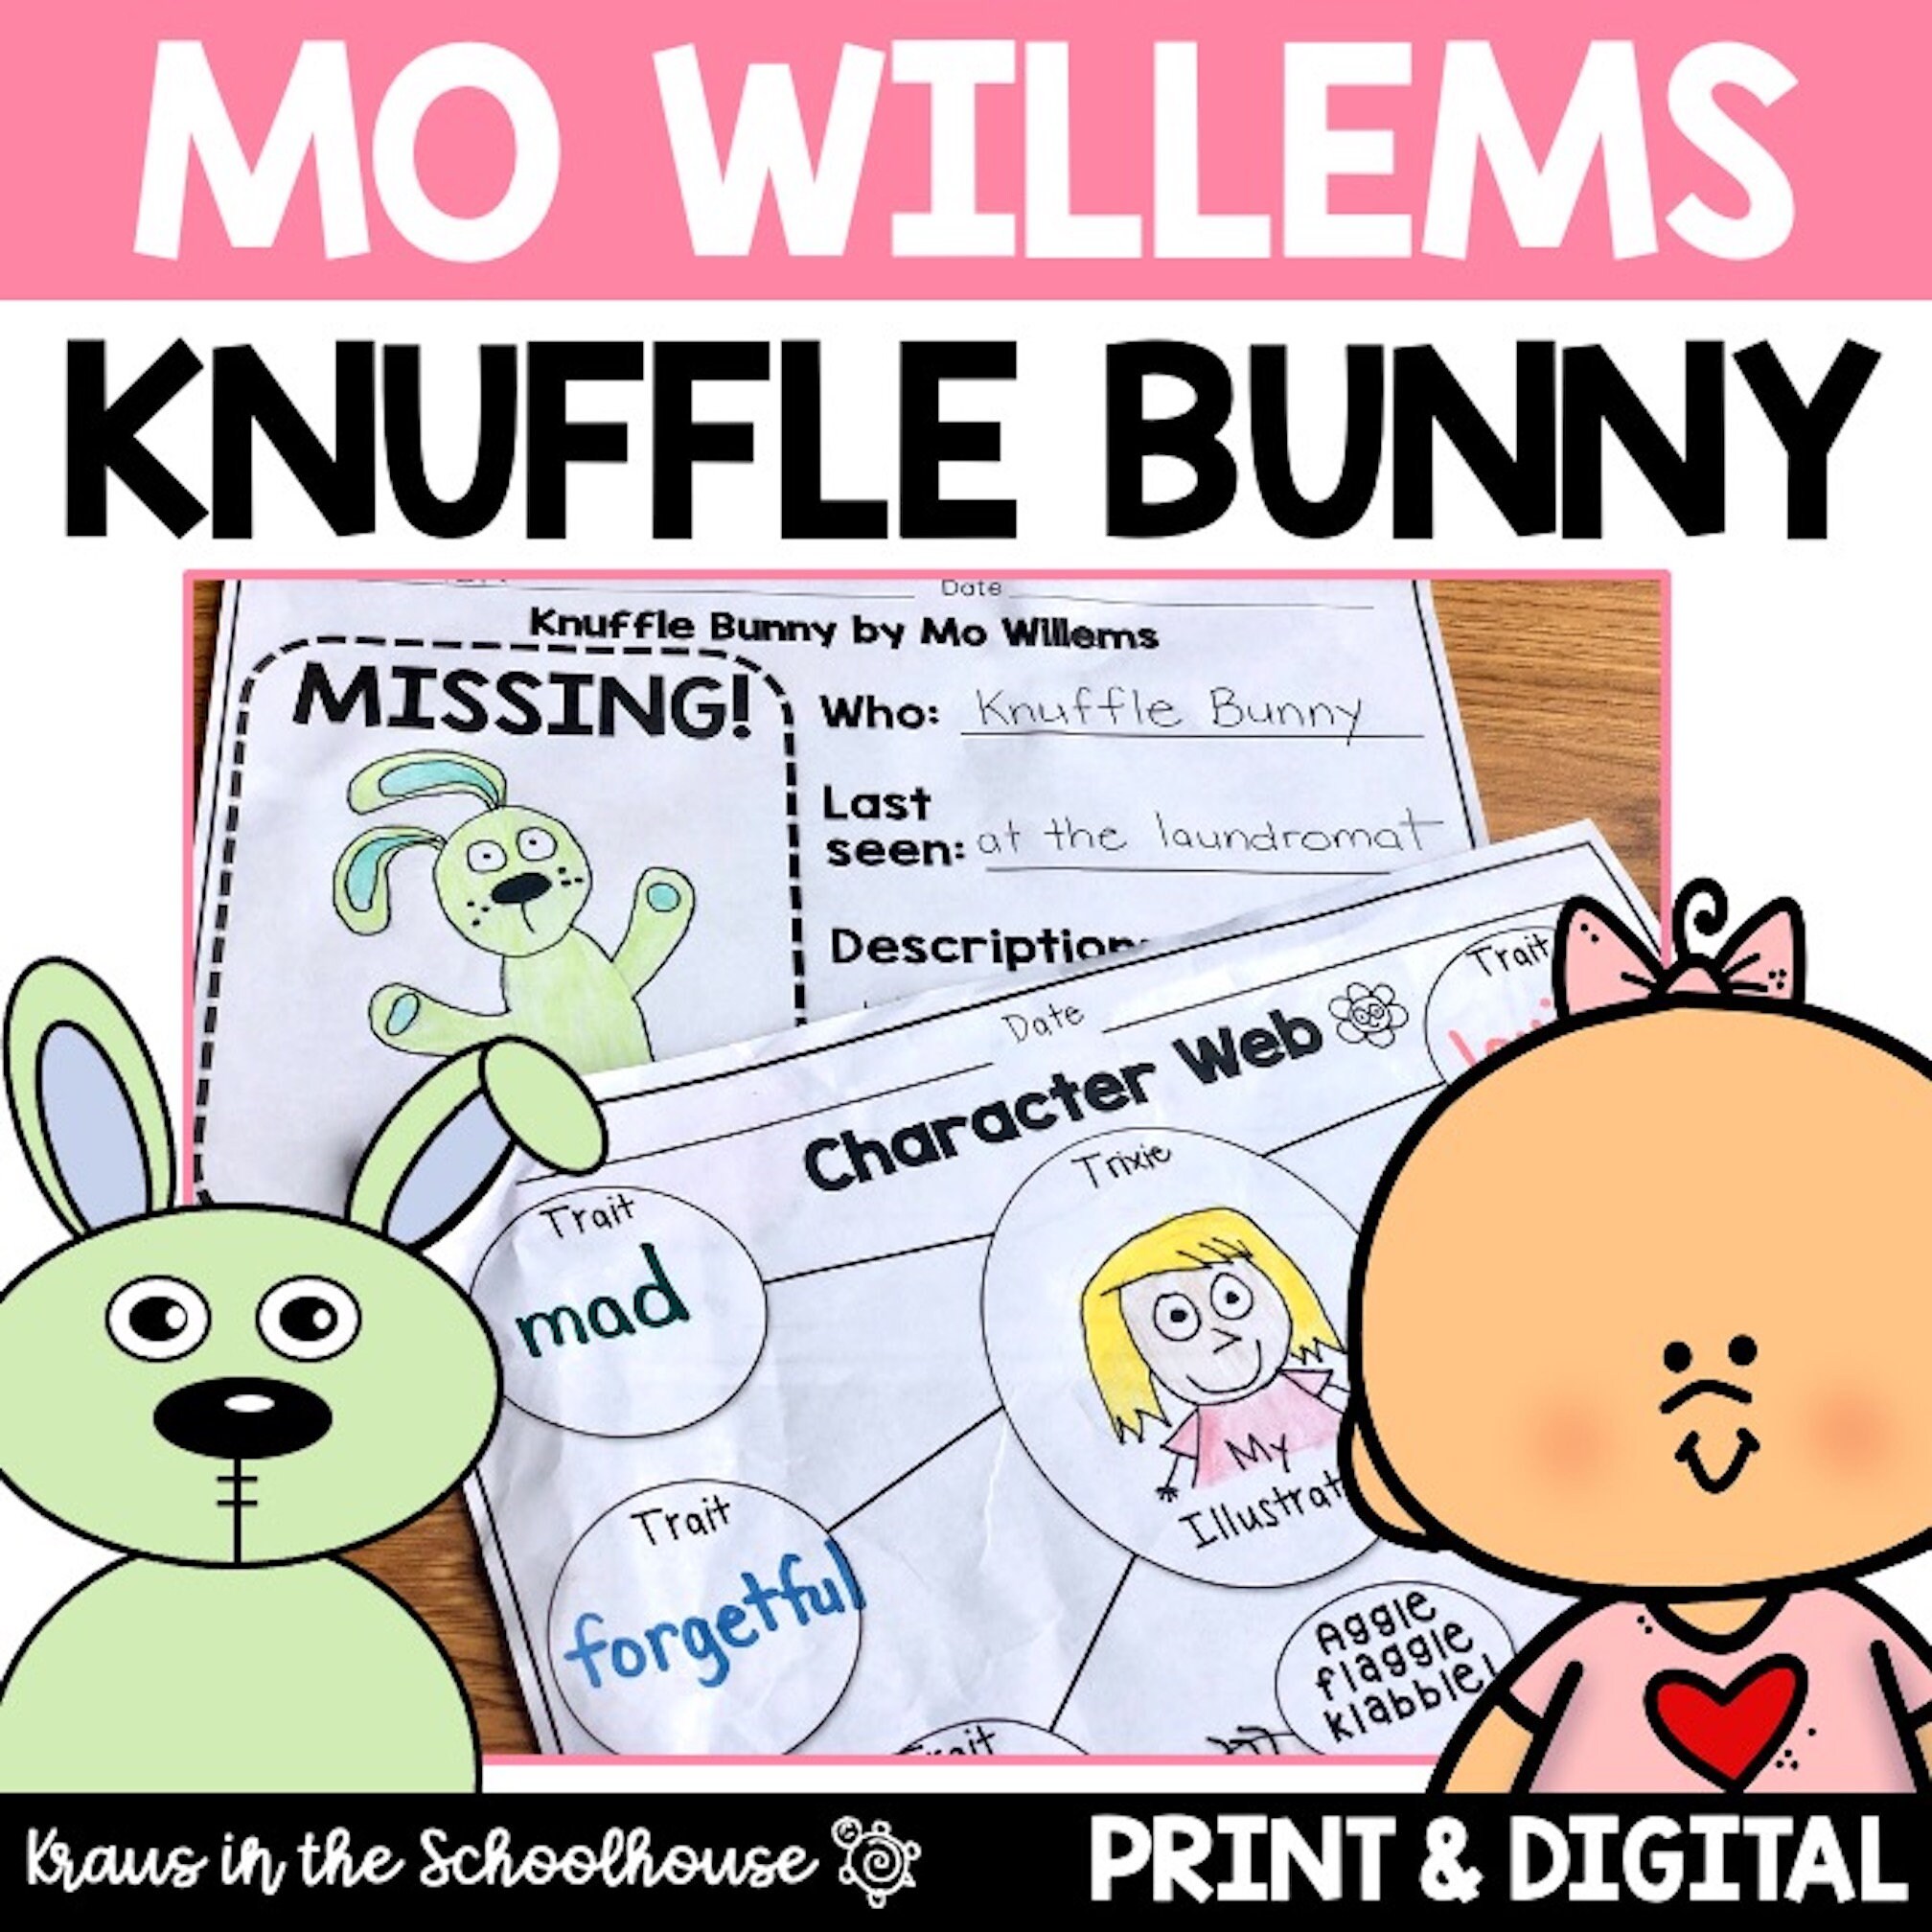 Knuffle bunny book study mo willems author study knuffle bunny worksheets and activity sheets read and respond activities